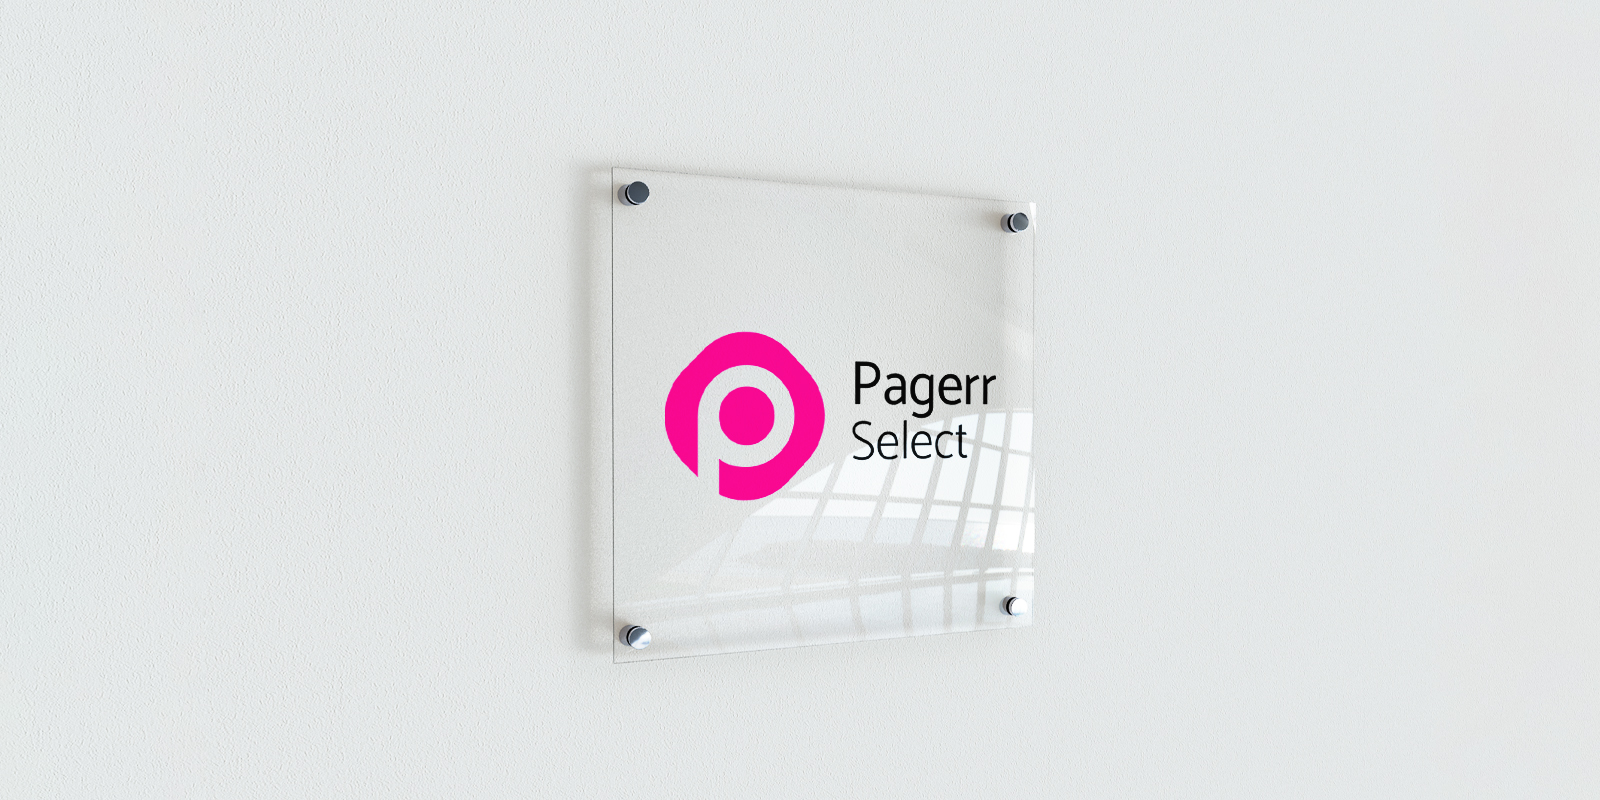 Acrylic signs in Paris - Print with Pagerr